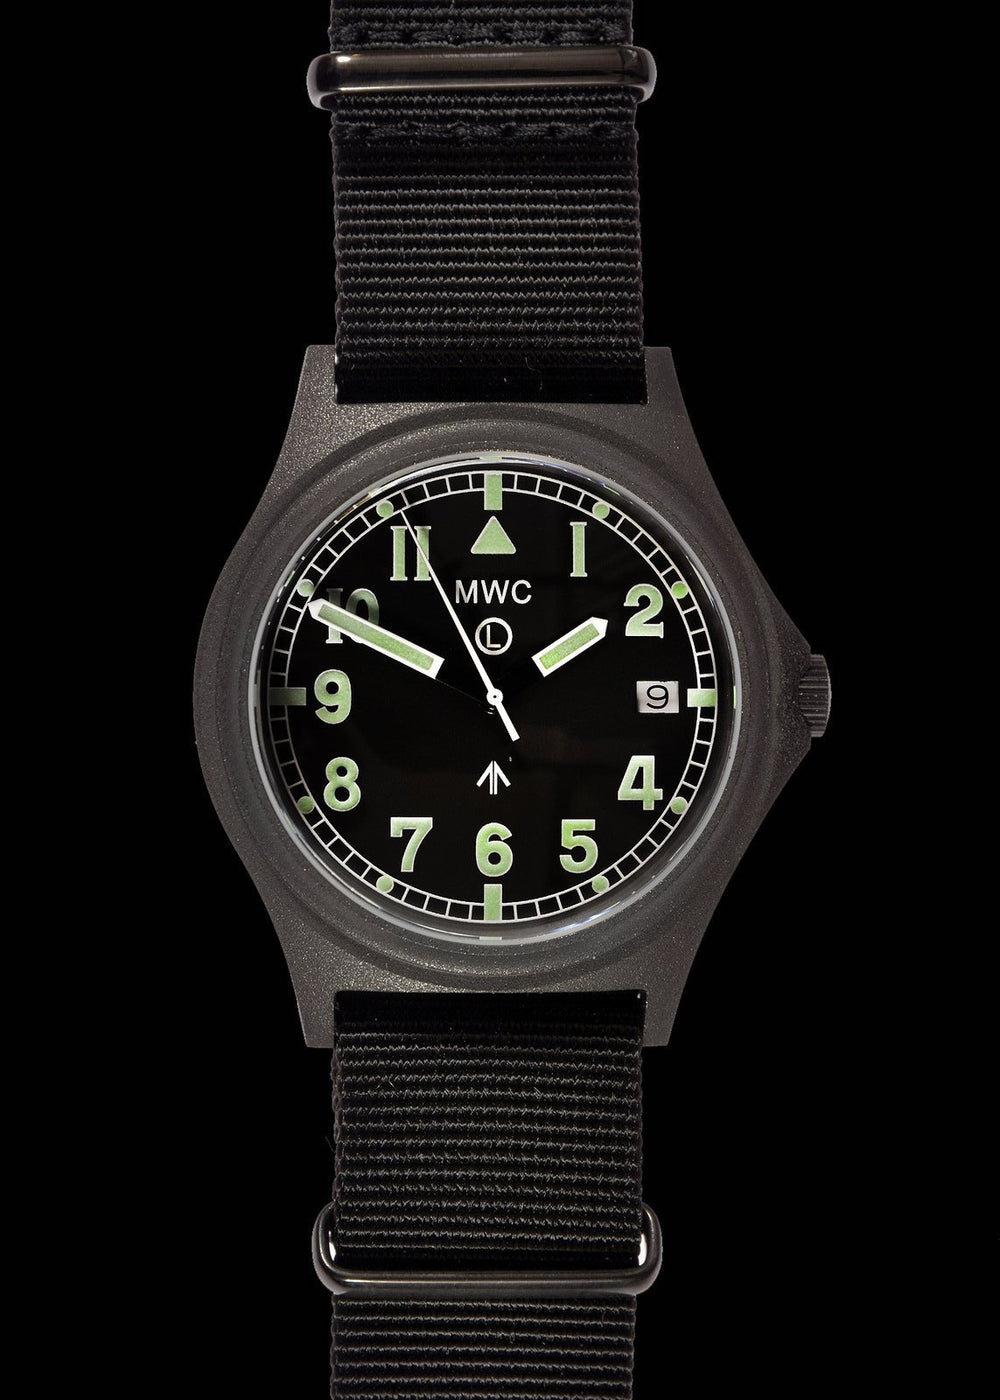 MWC Infantry Watch - G10 300m / 1000ft Water Resistant Military Watch in PVD Steel Case with Sapphire Crystal (Dated)